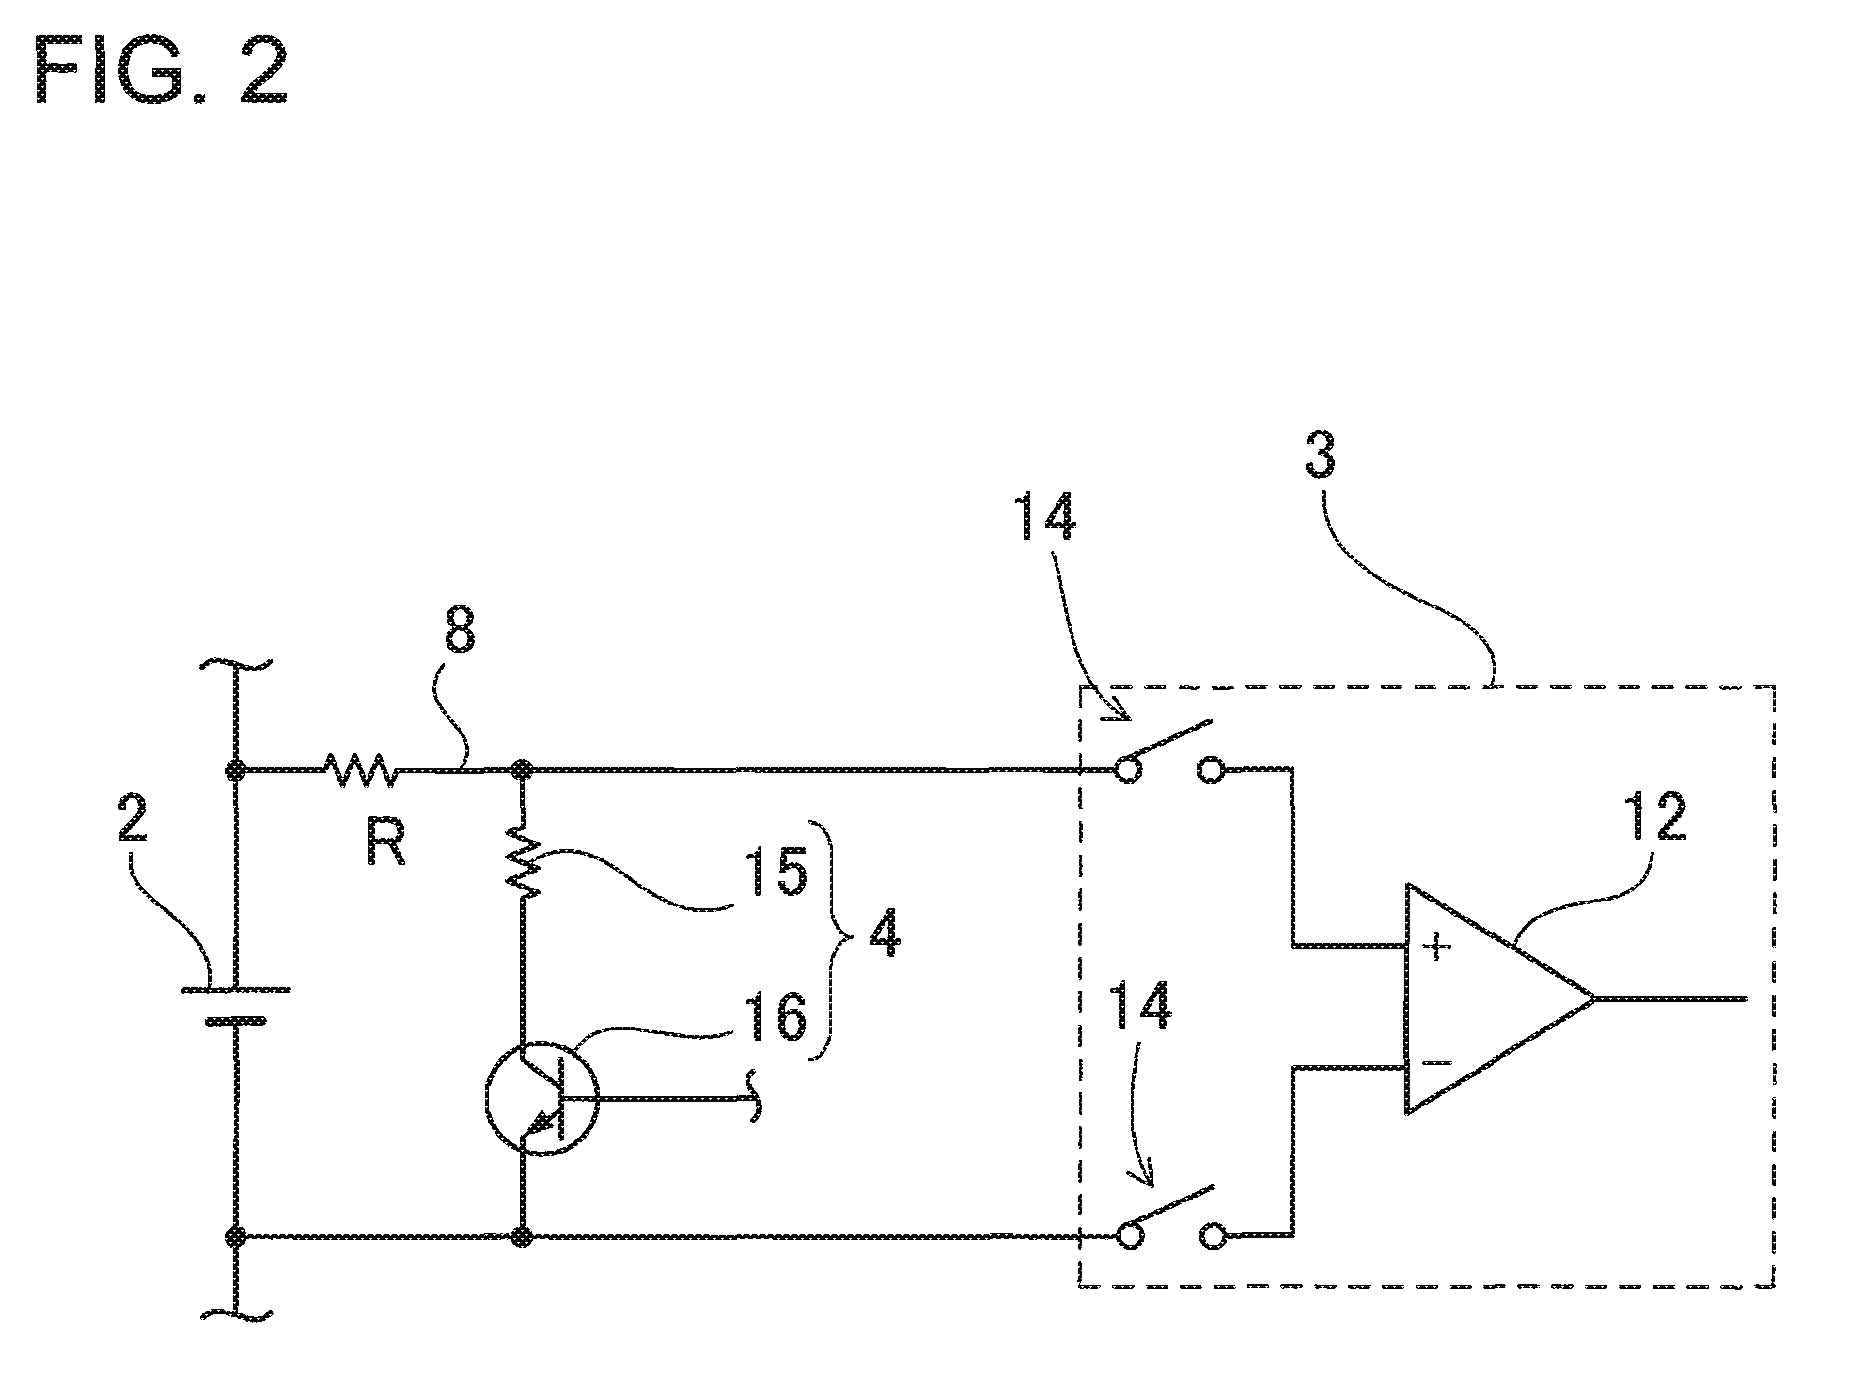 Battery system with practical voltage detection